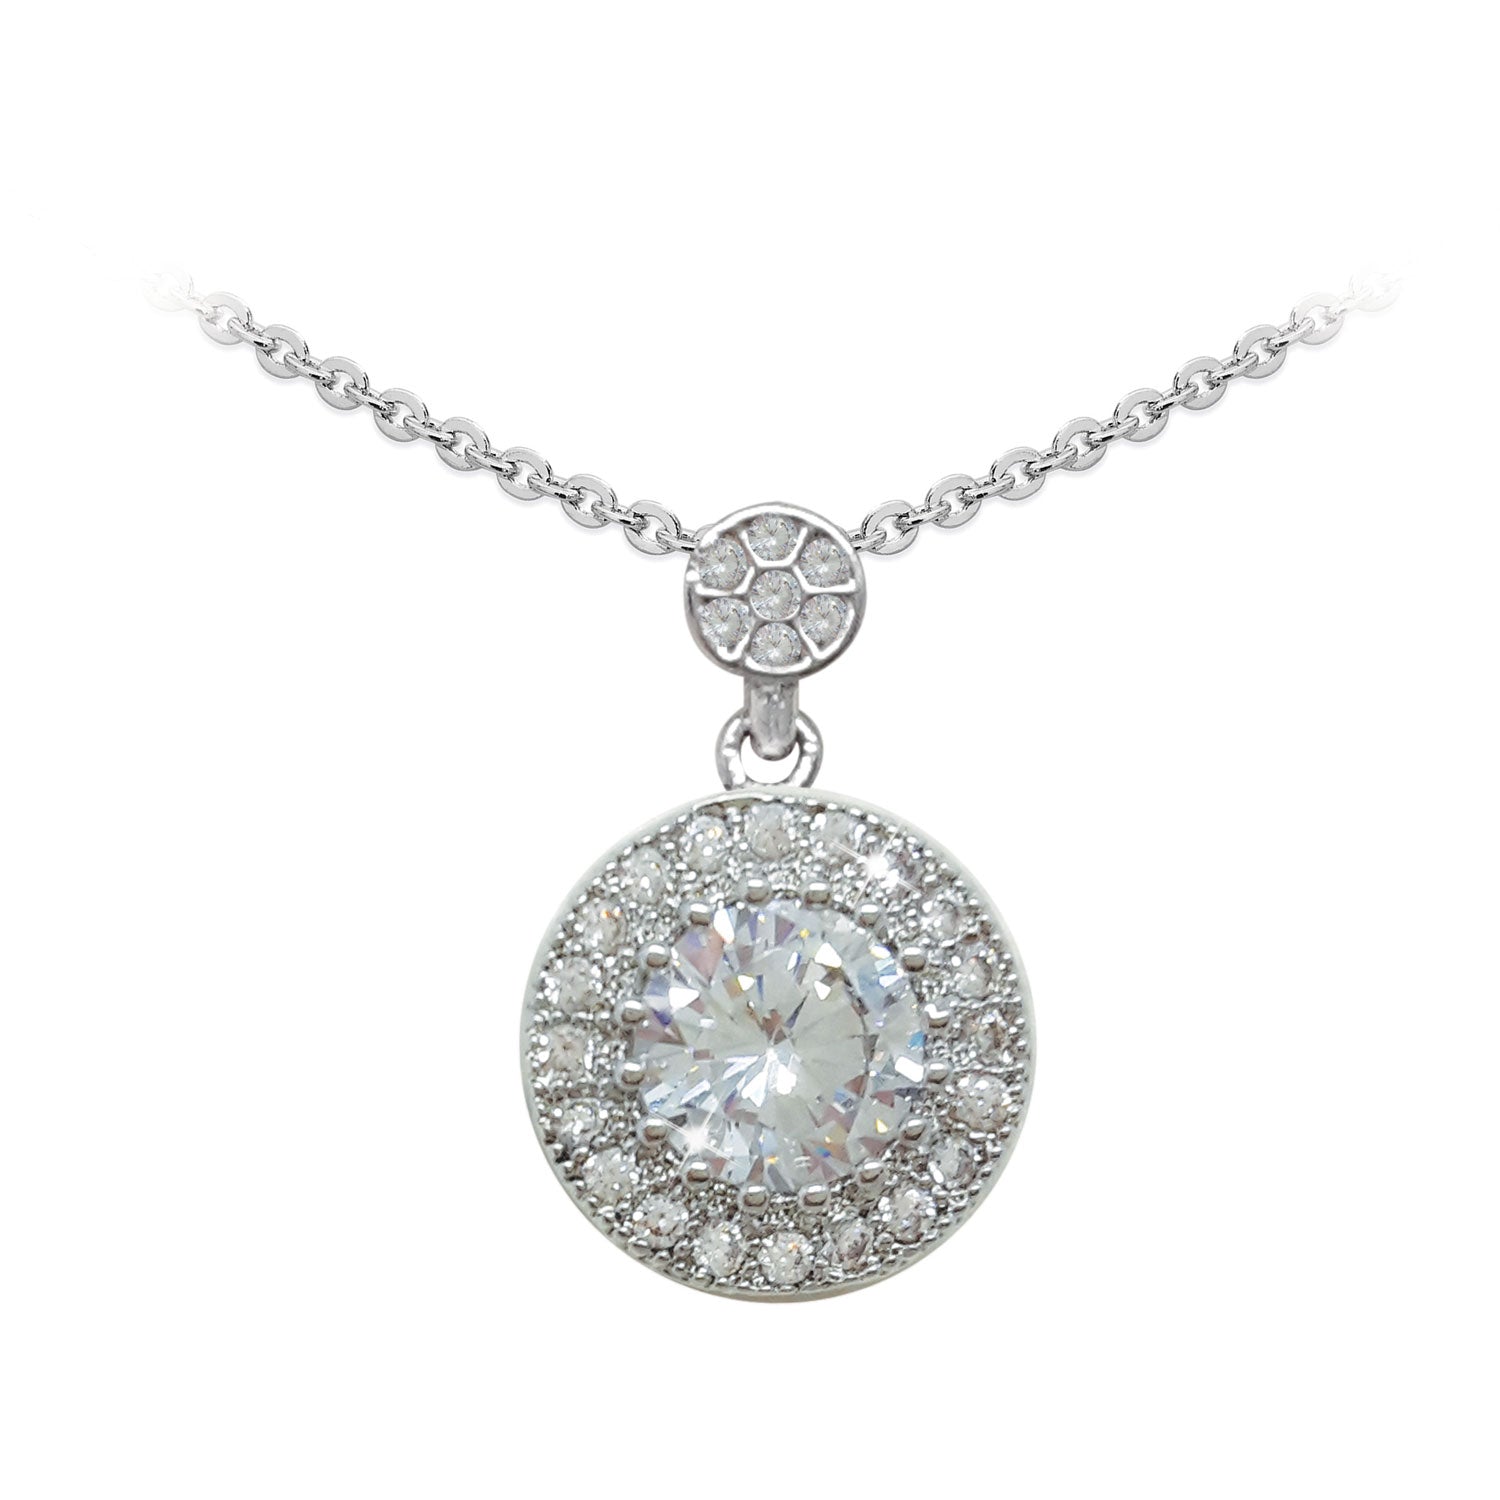 Tipperary Jewellery Round Pendant with Pavé Surround - Silver 1 Shaws Department Stores